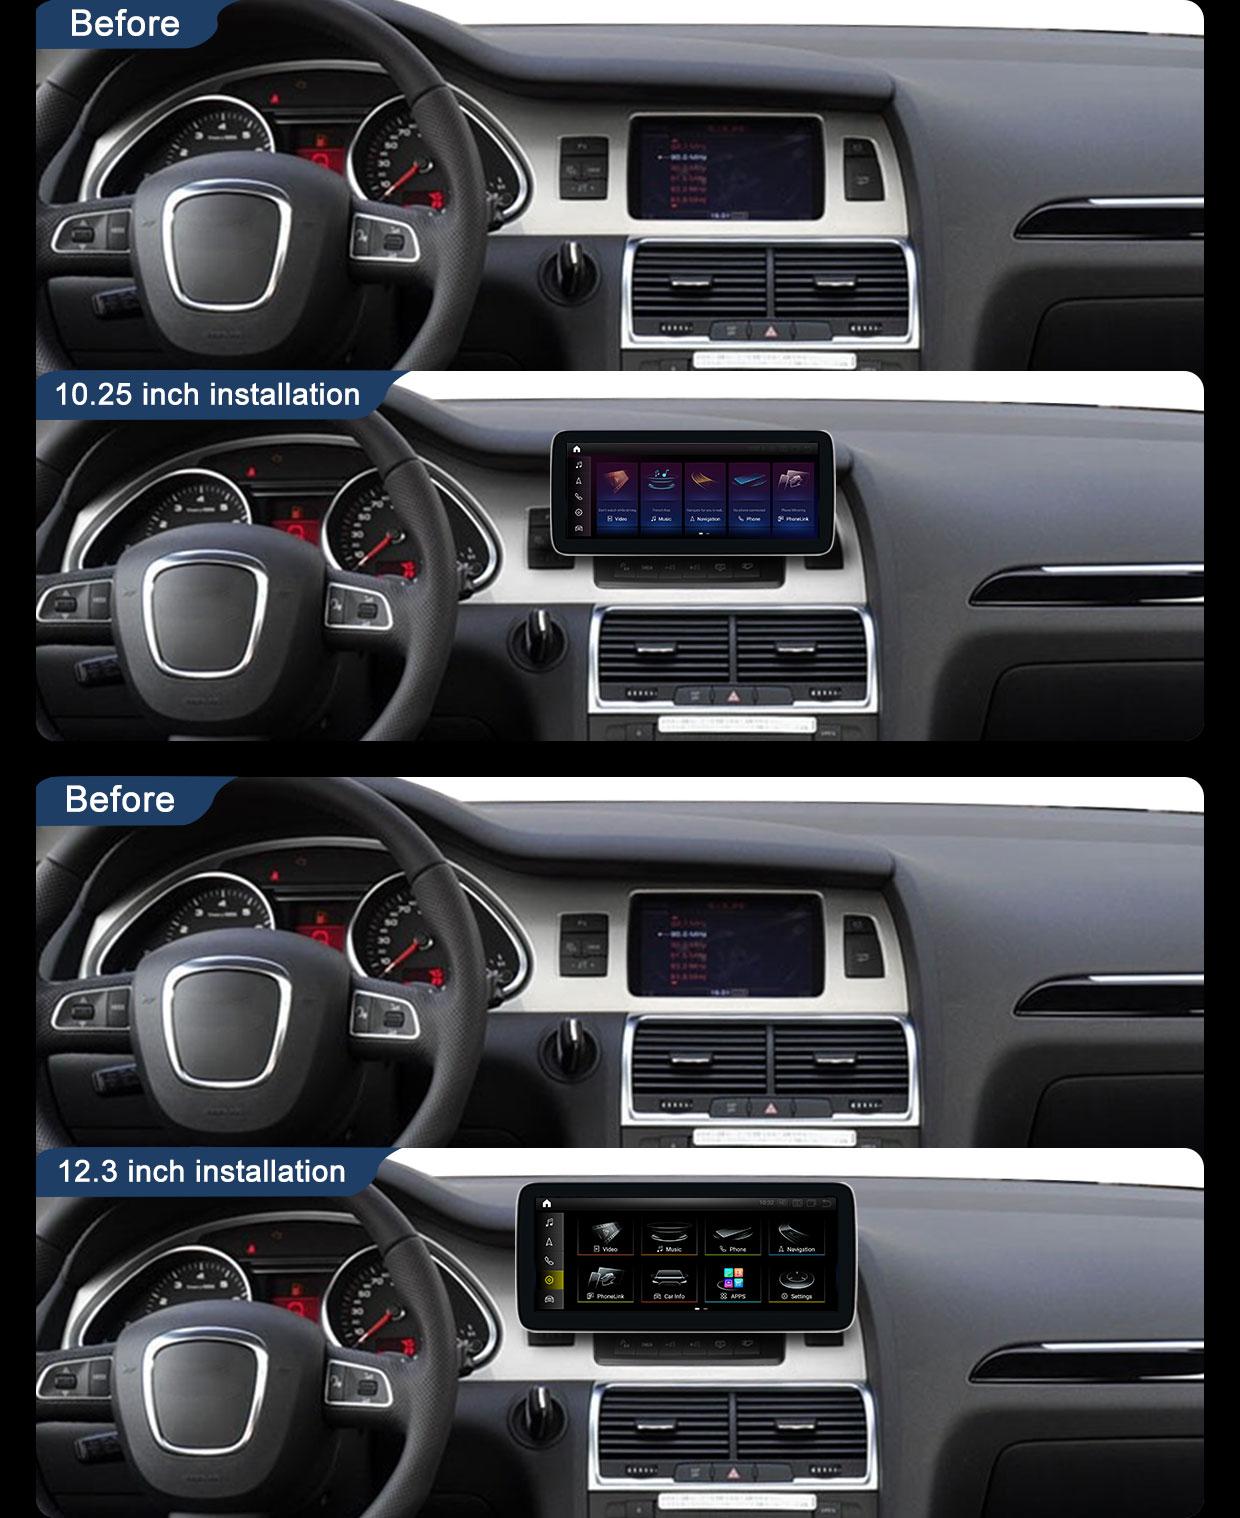 Audi-Q7-android-screen (2)